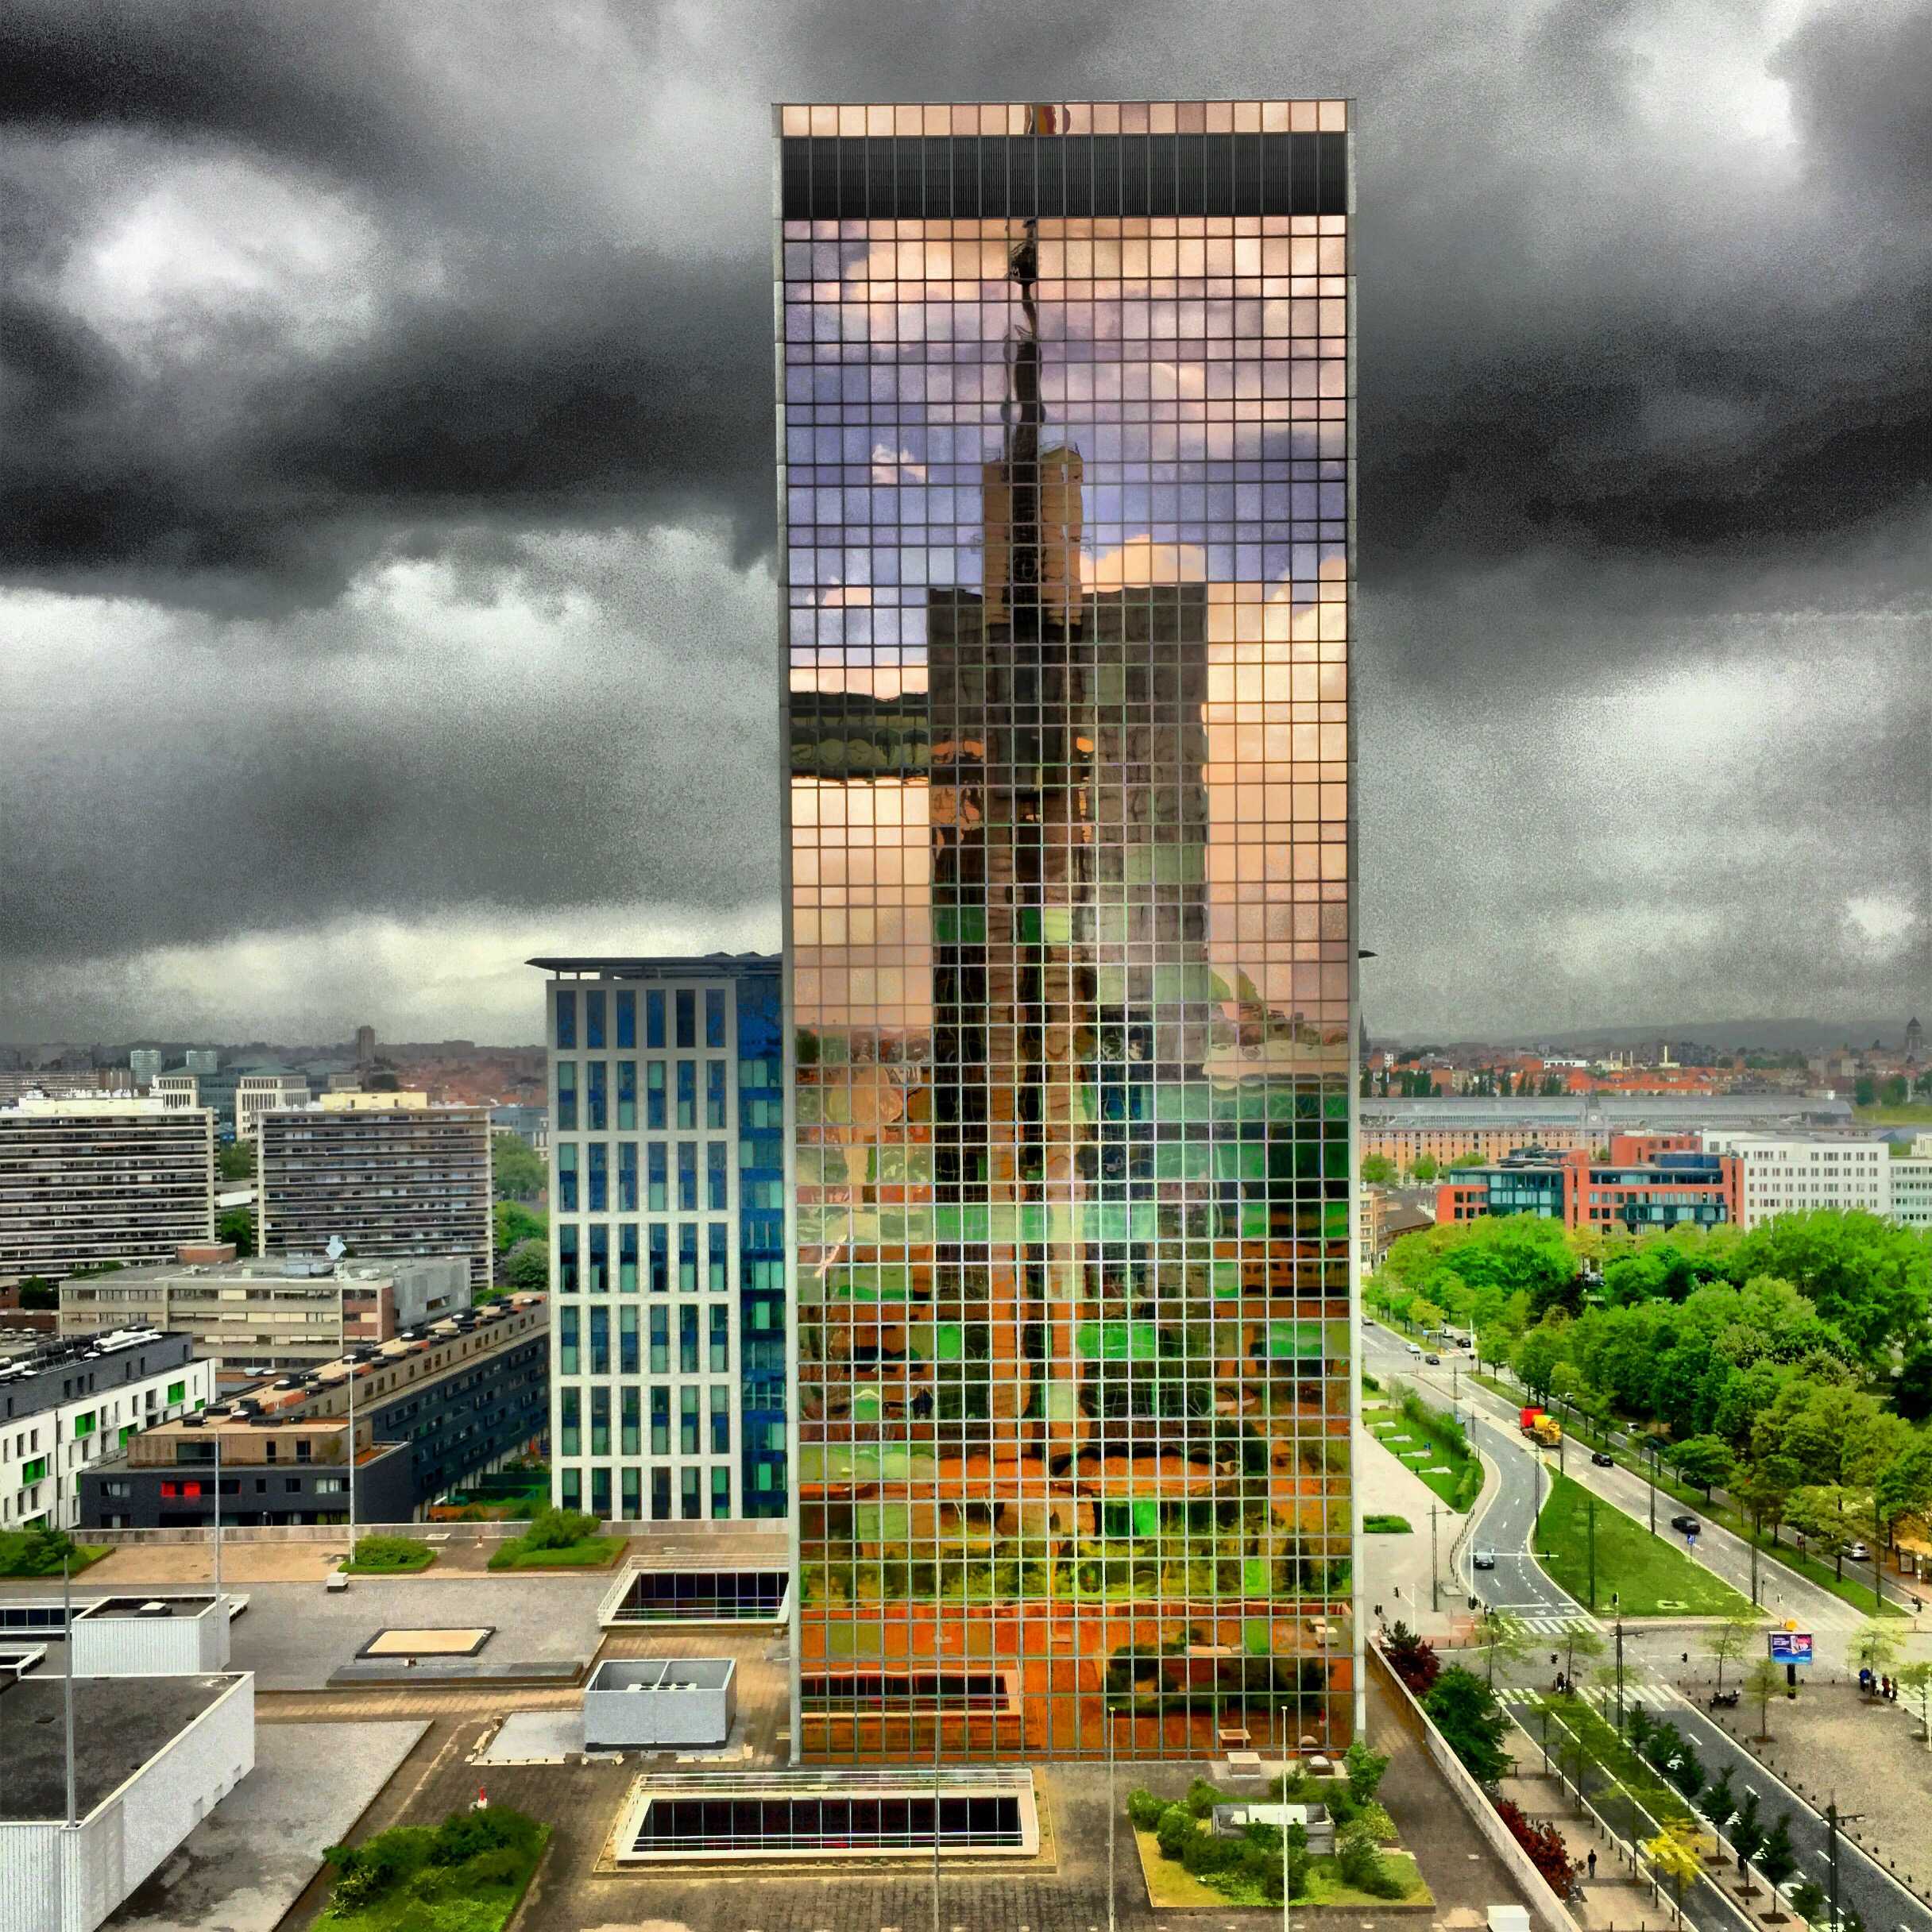 A large skyscraper is reflected in a glass building, showcasing the potential consequences of bandwidth caps on the internet's future.